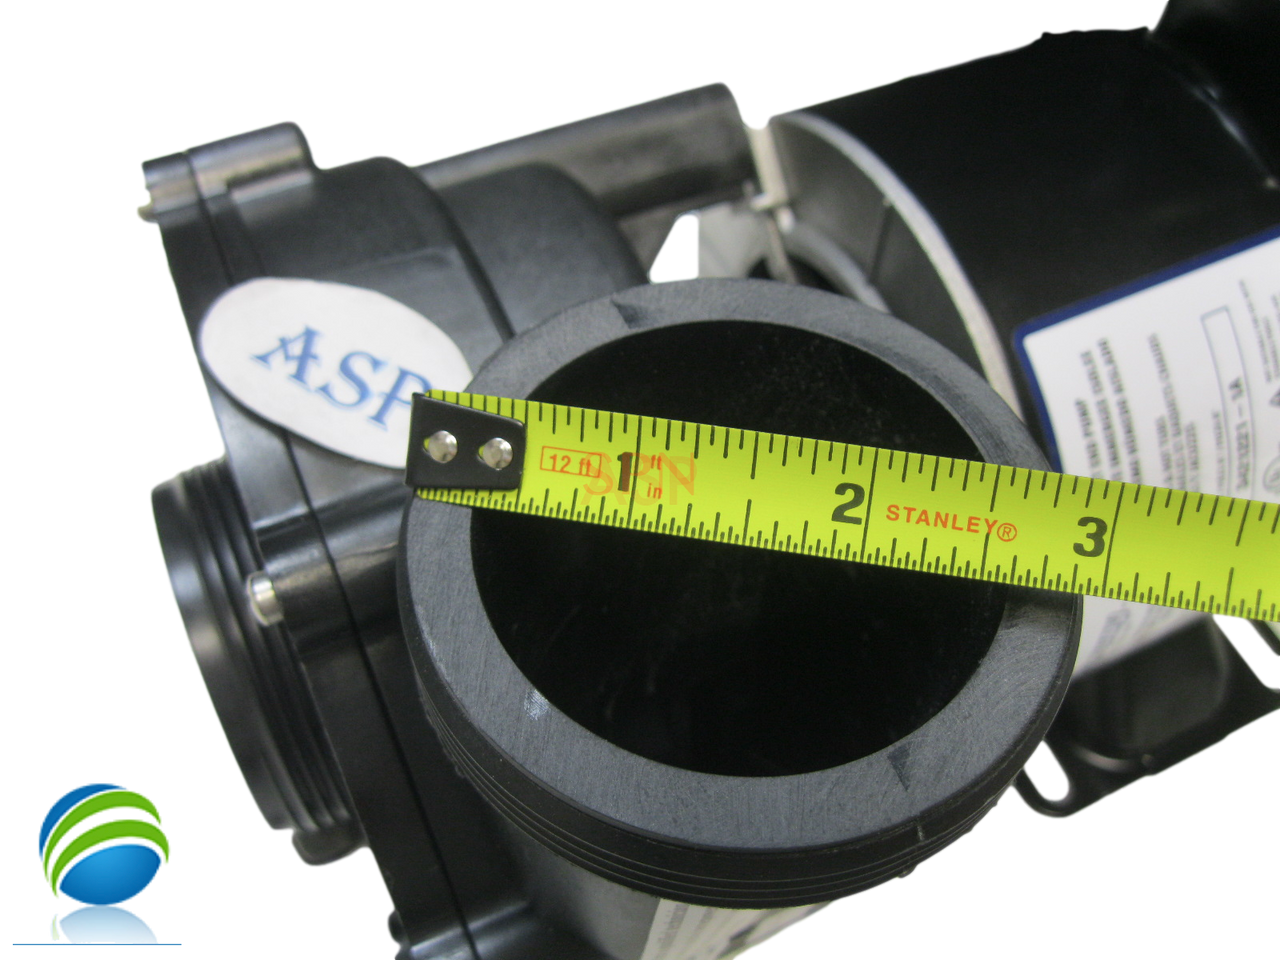 Complete Pump, Watkins, XP2, 2.5HP, 230v, 2-spd, 48frame, 2", 1 or 2 speed 10.7A
The Suction and Pressure Sides measures about 3" Edge to Edge..